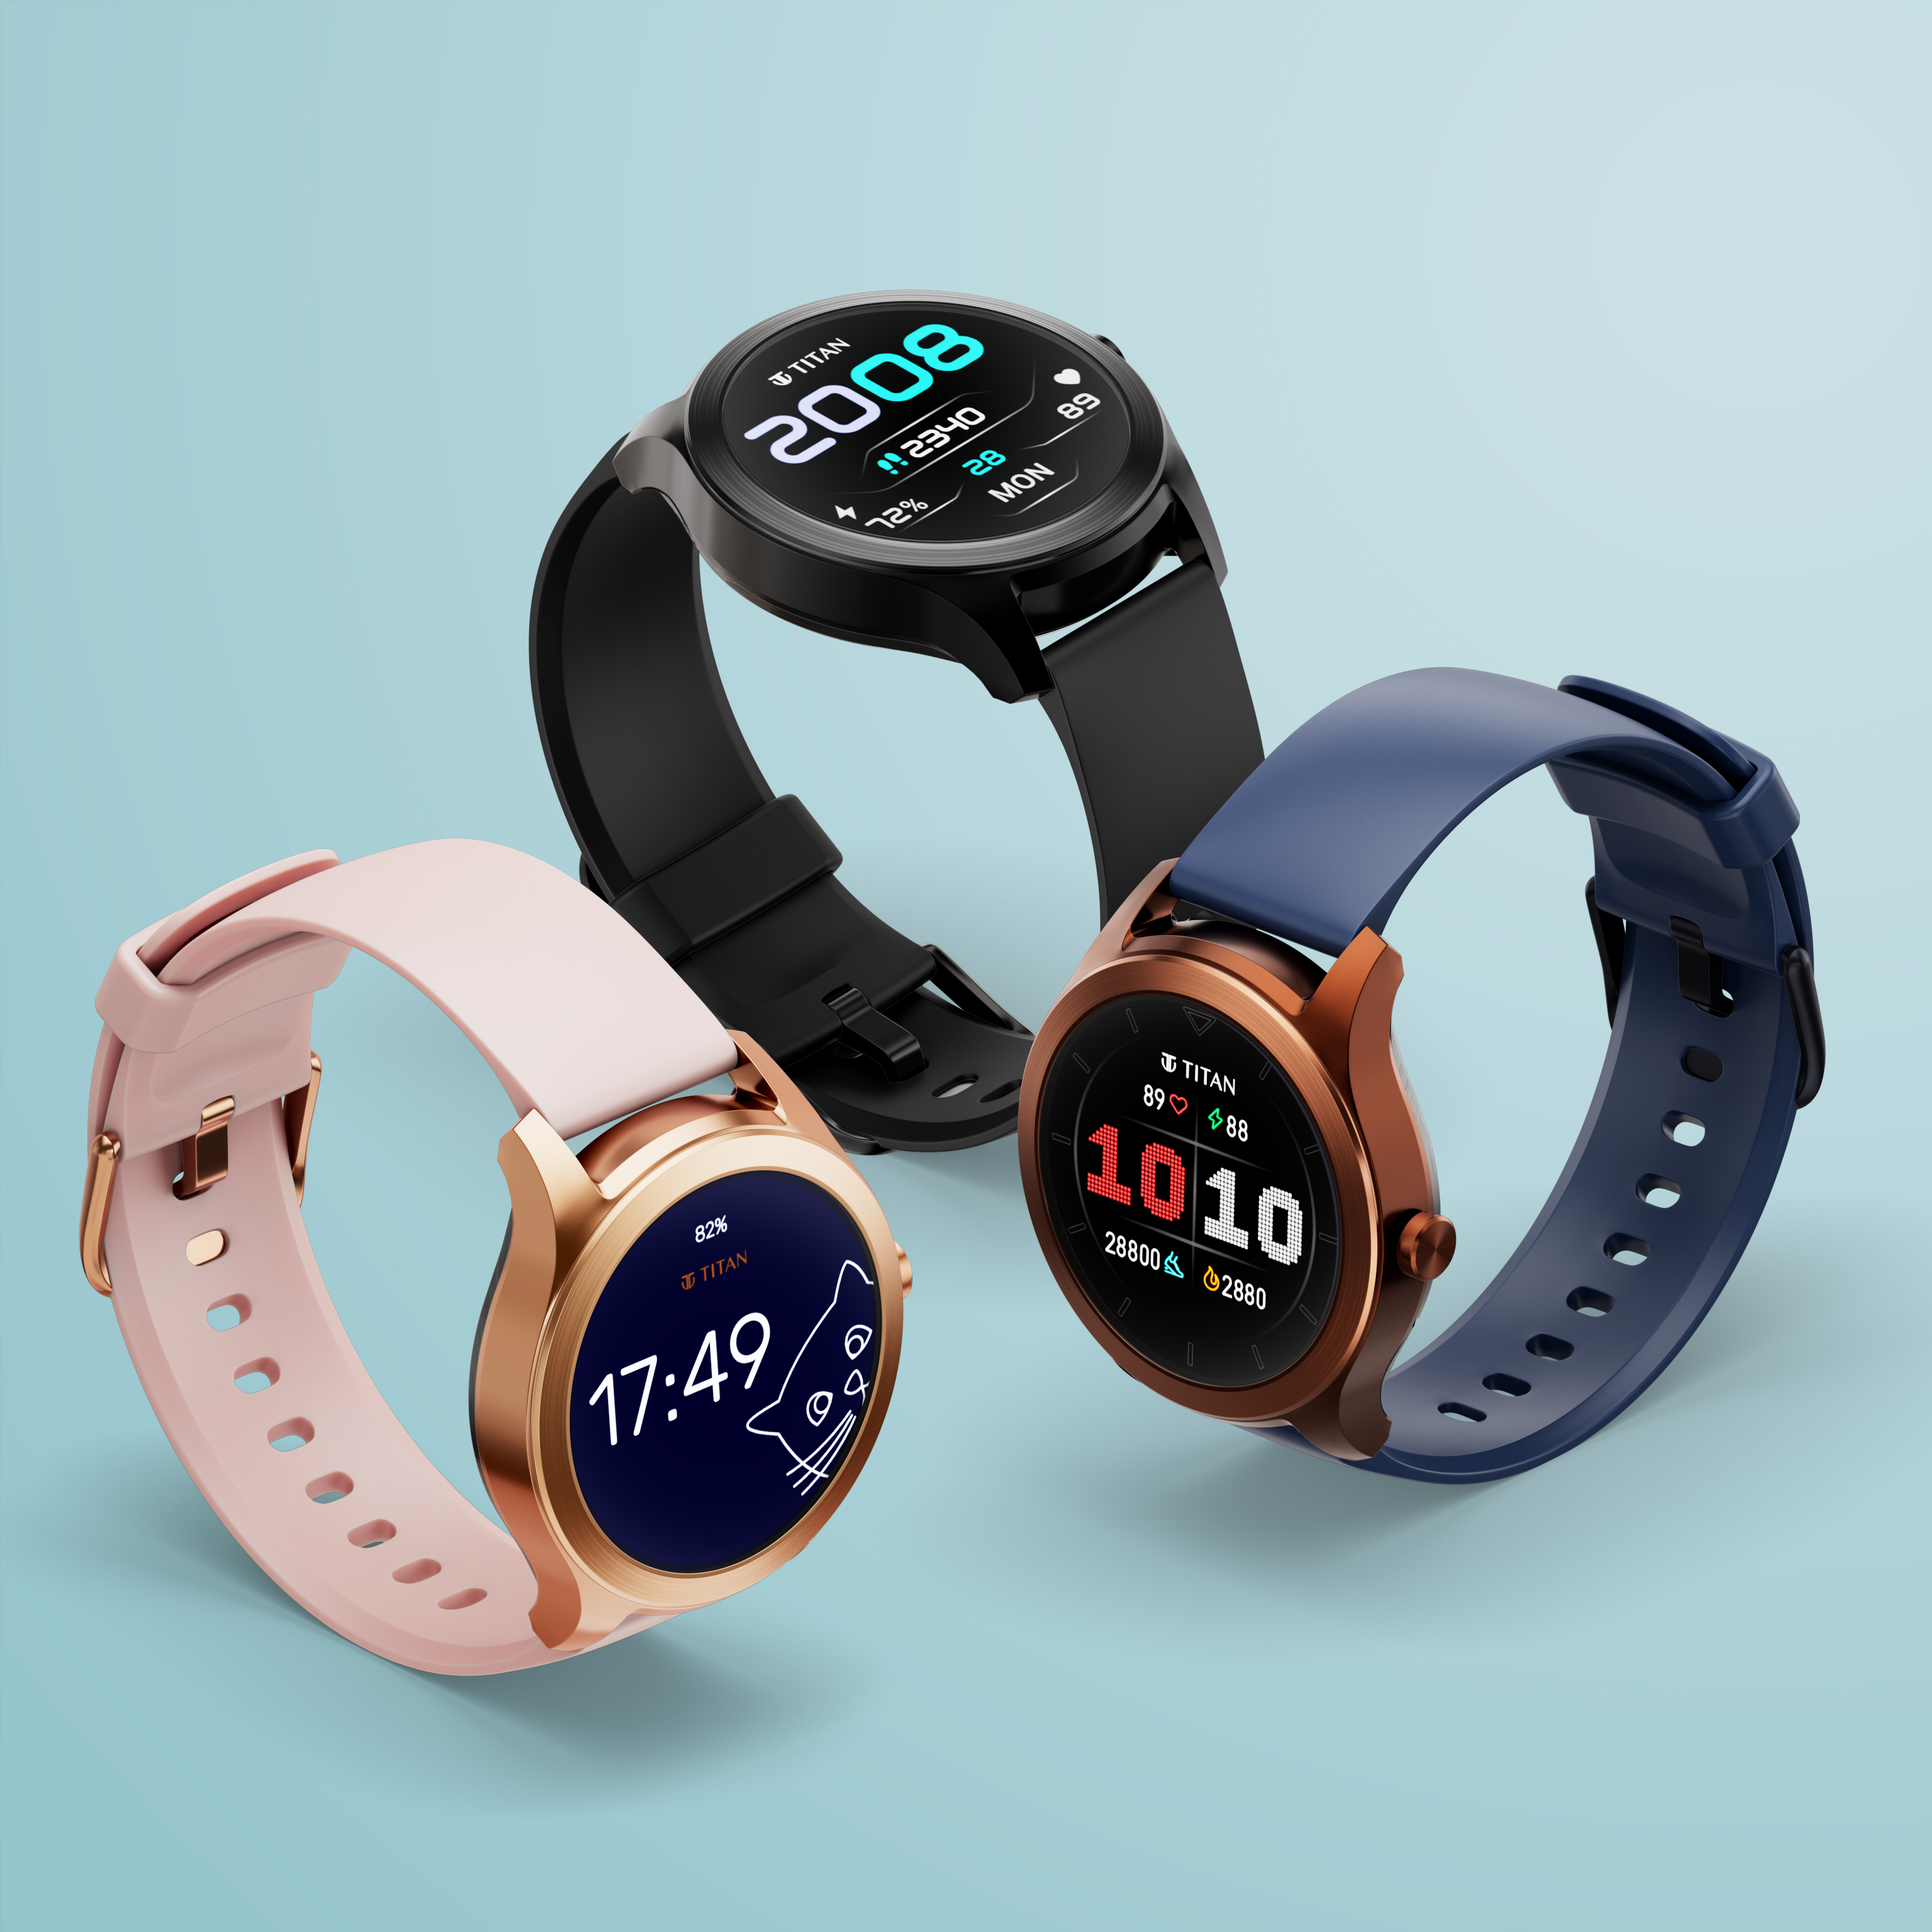 Titan unveils its latest smart watch, Titan Smart with the best-in-class features